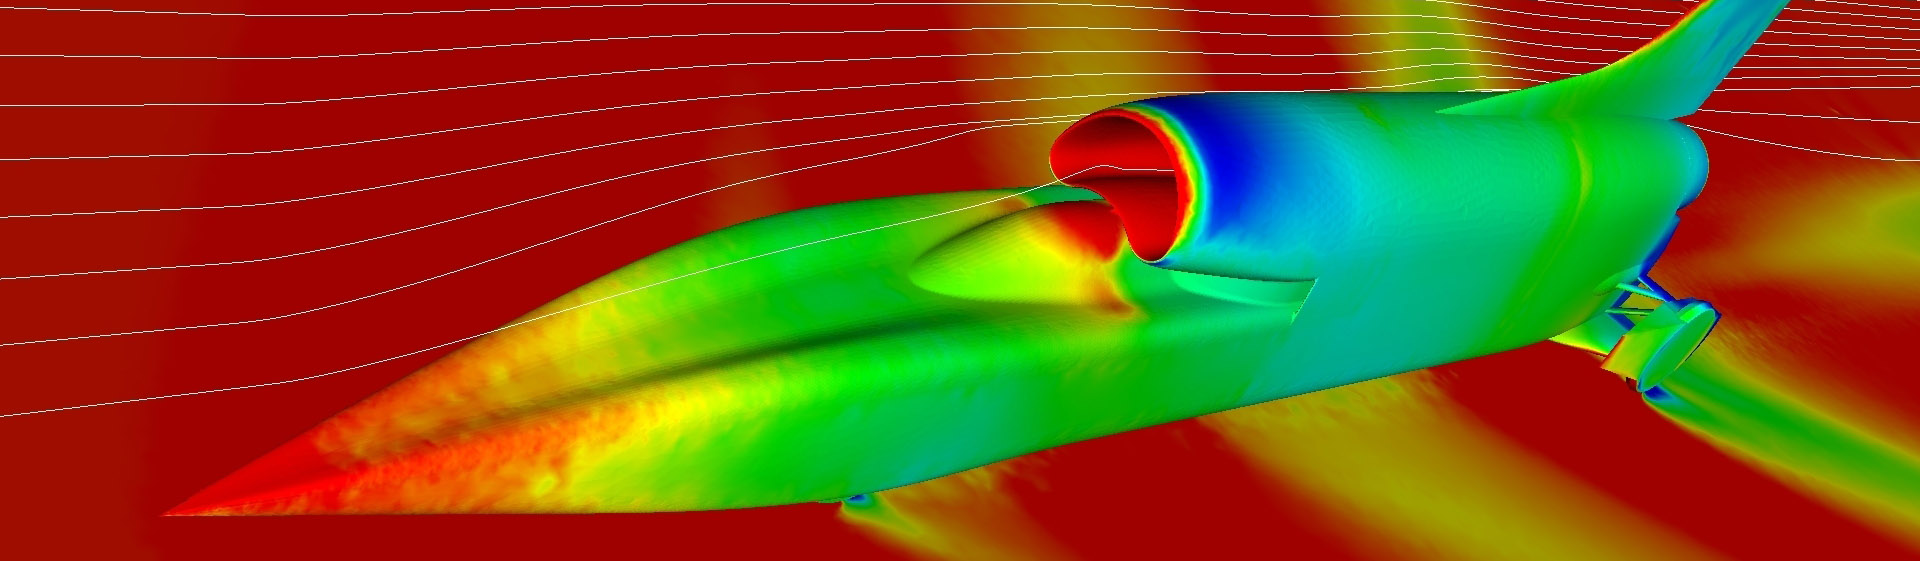 CFD images of Bloodhound SSC